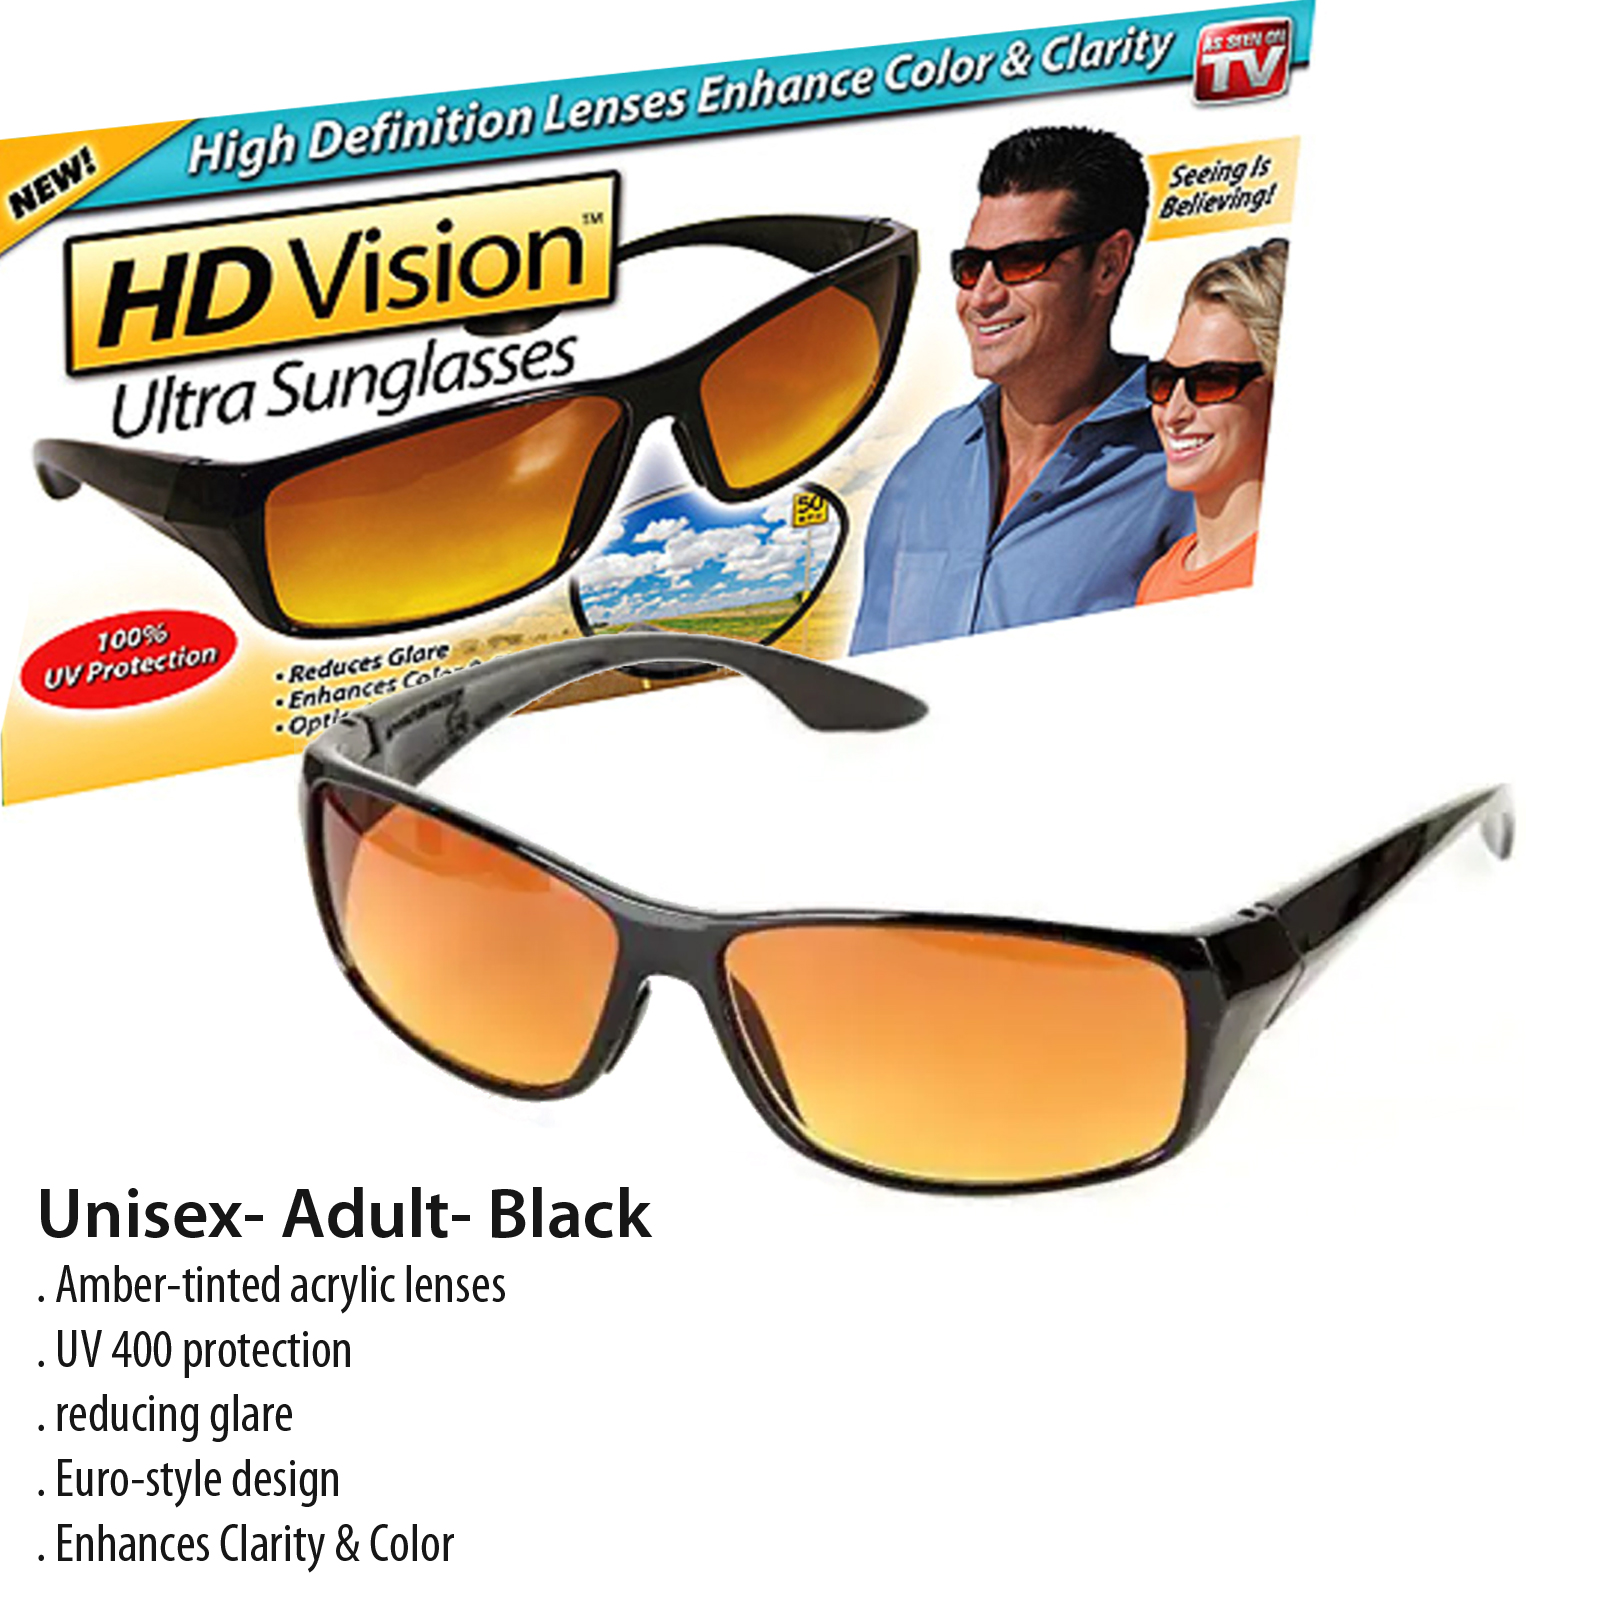 As Seen on TV HD Vision Ultra Sunglasses - image 3 of 3